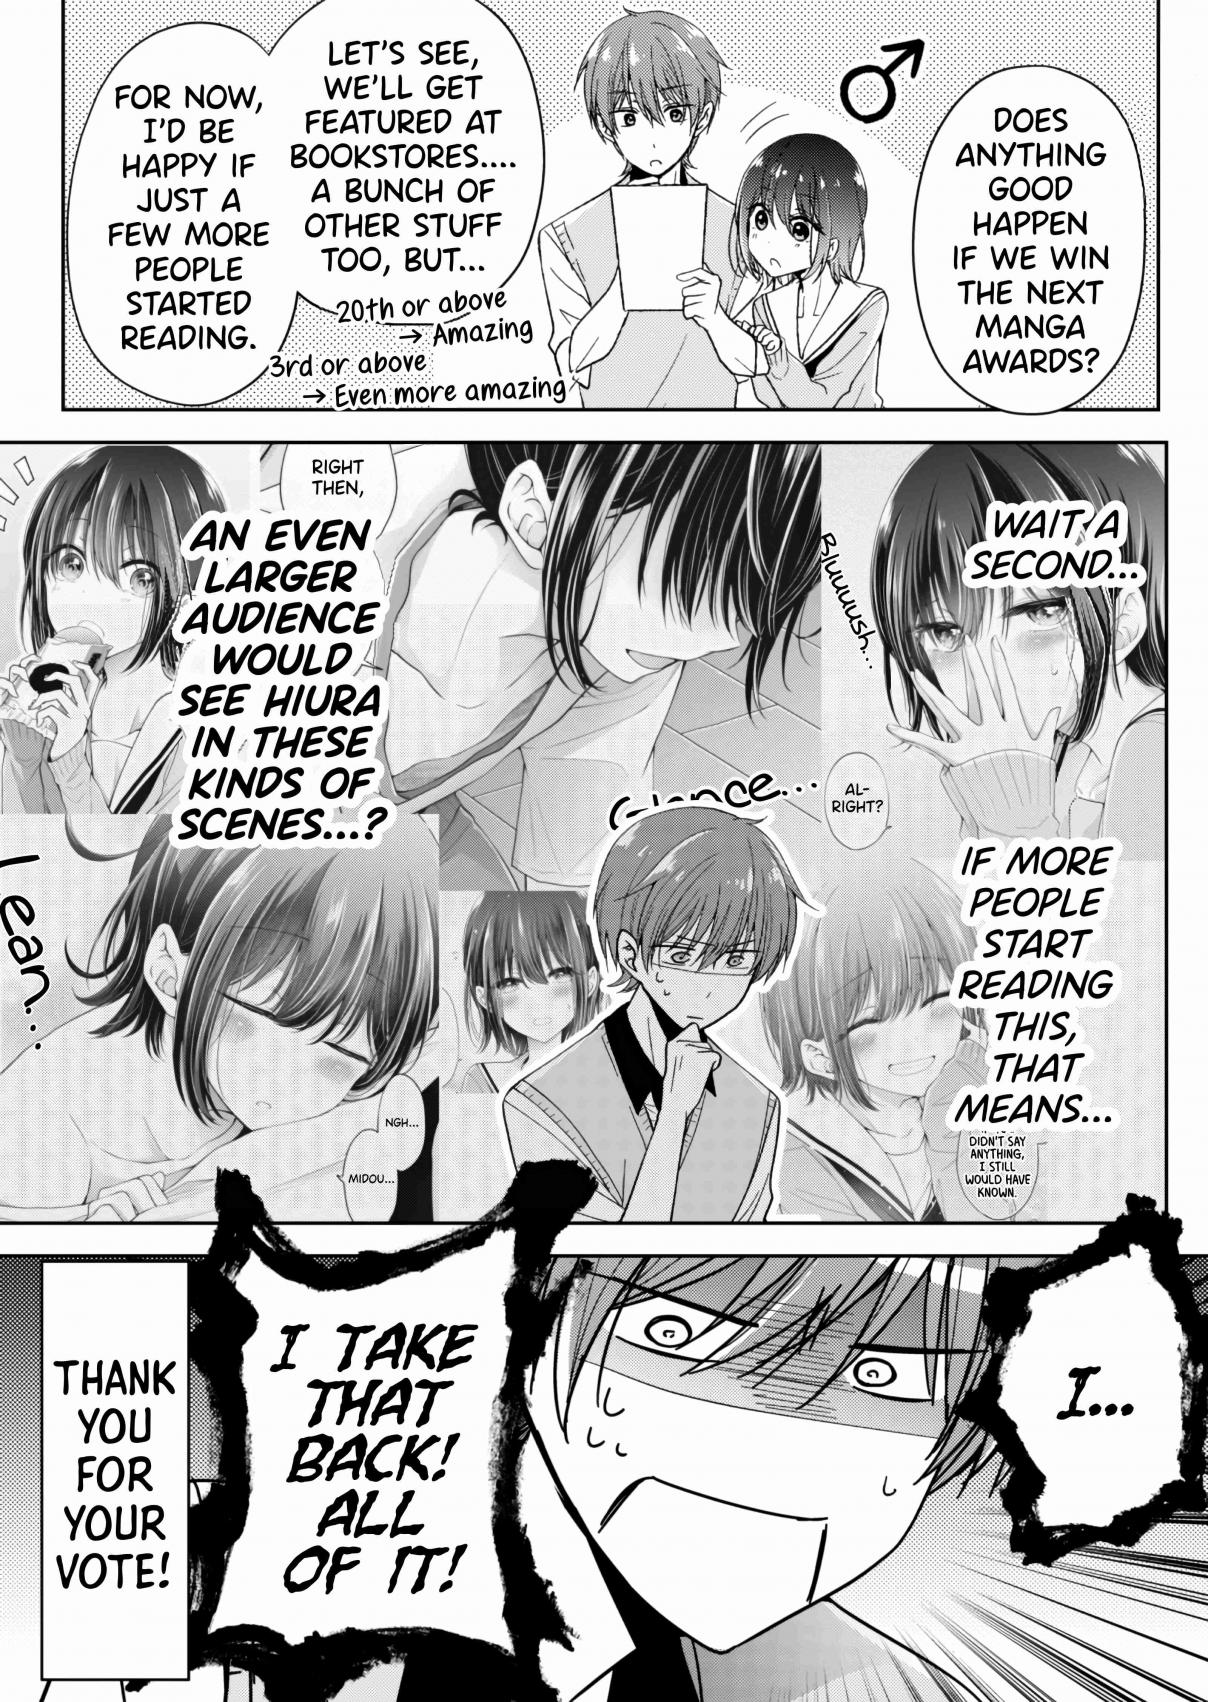 How to Make a "Girl" Fall in Love Ch. 5.46 Next Manga Awards 2020 (2)